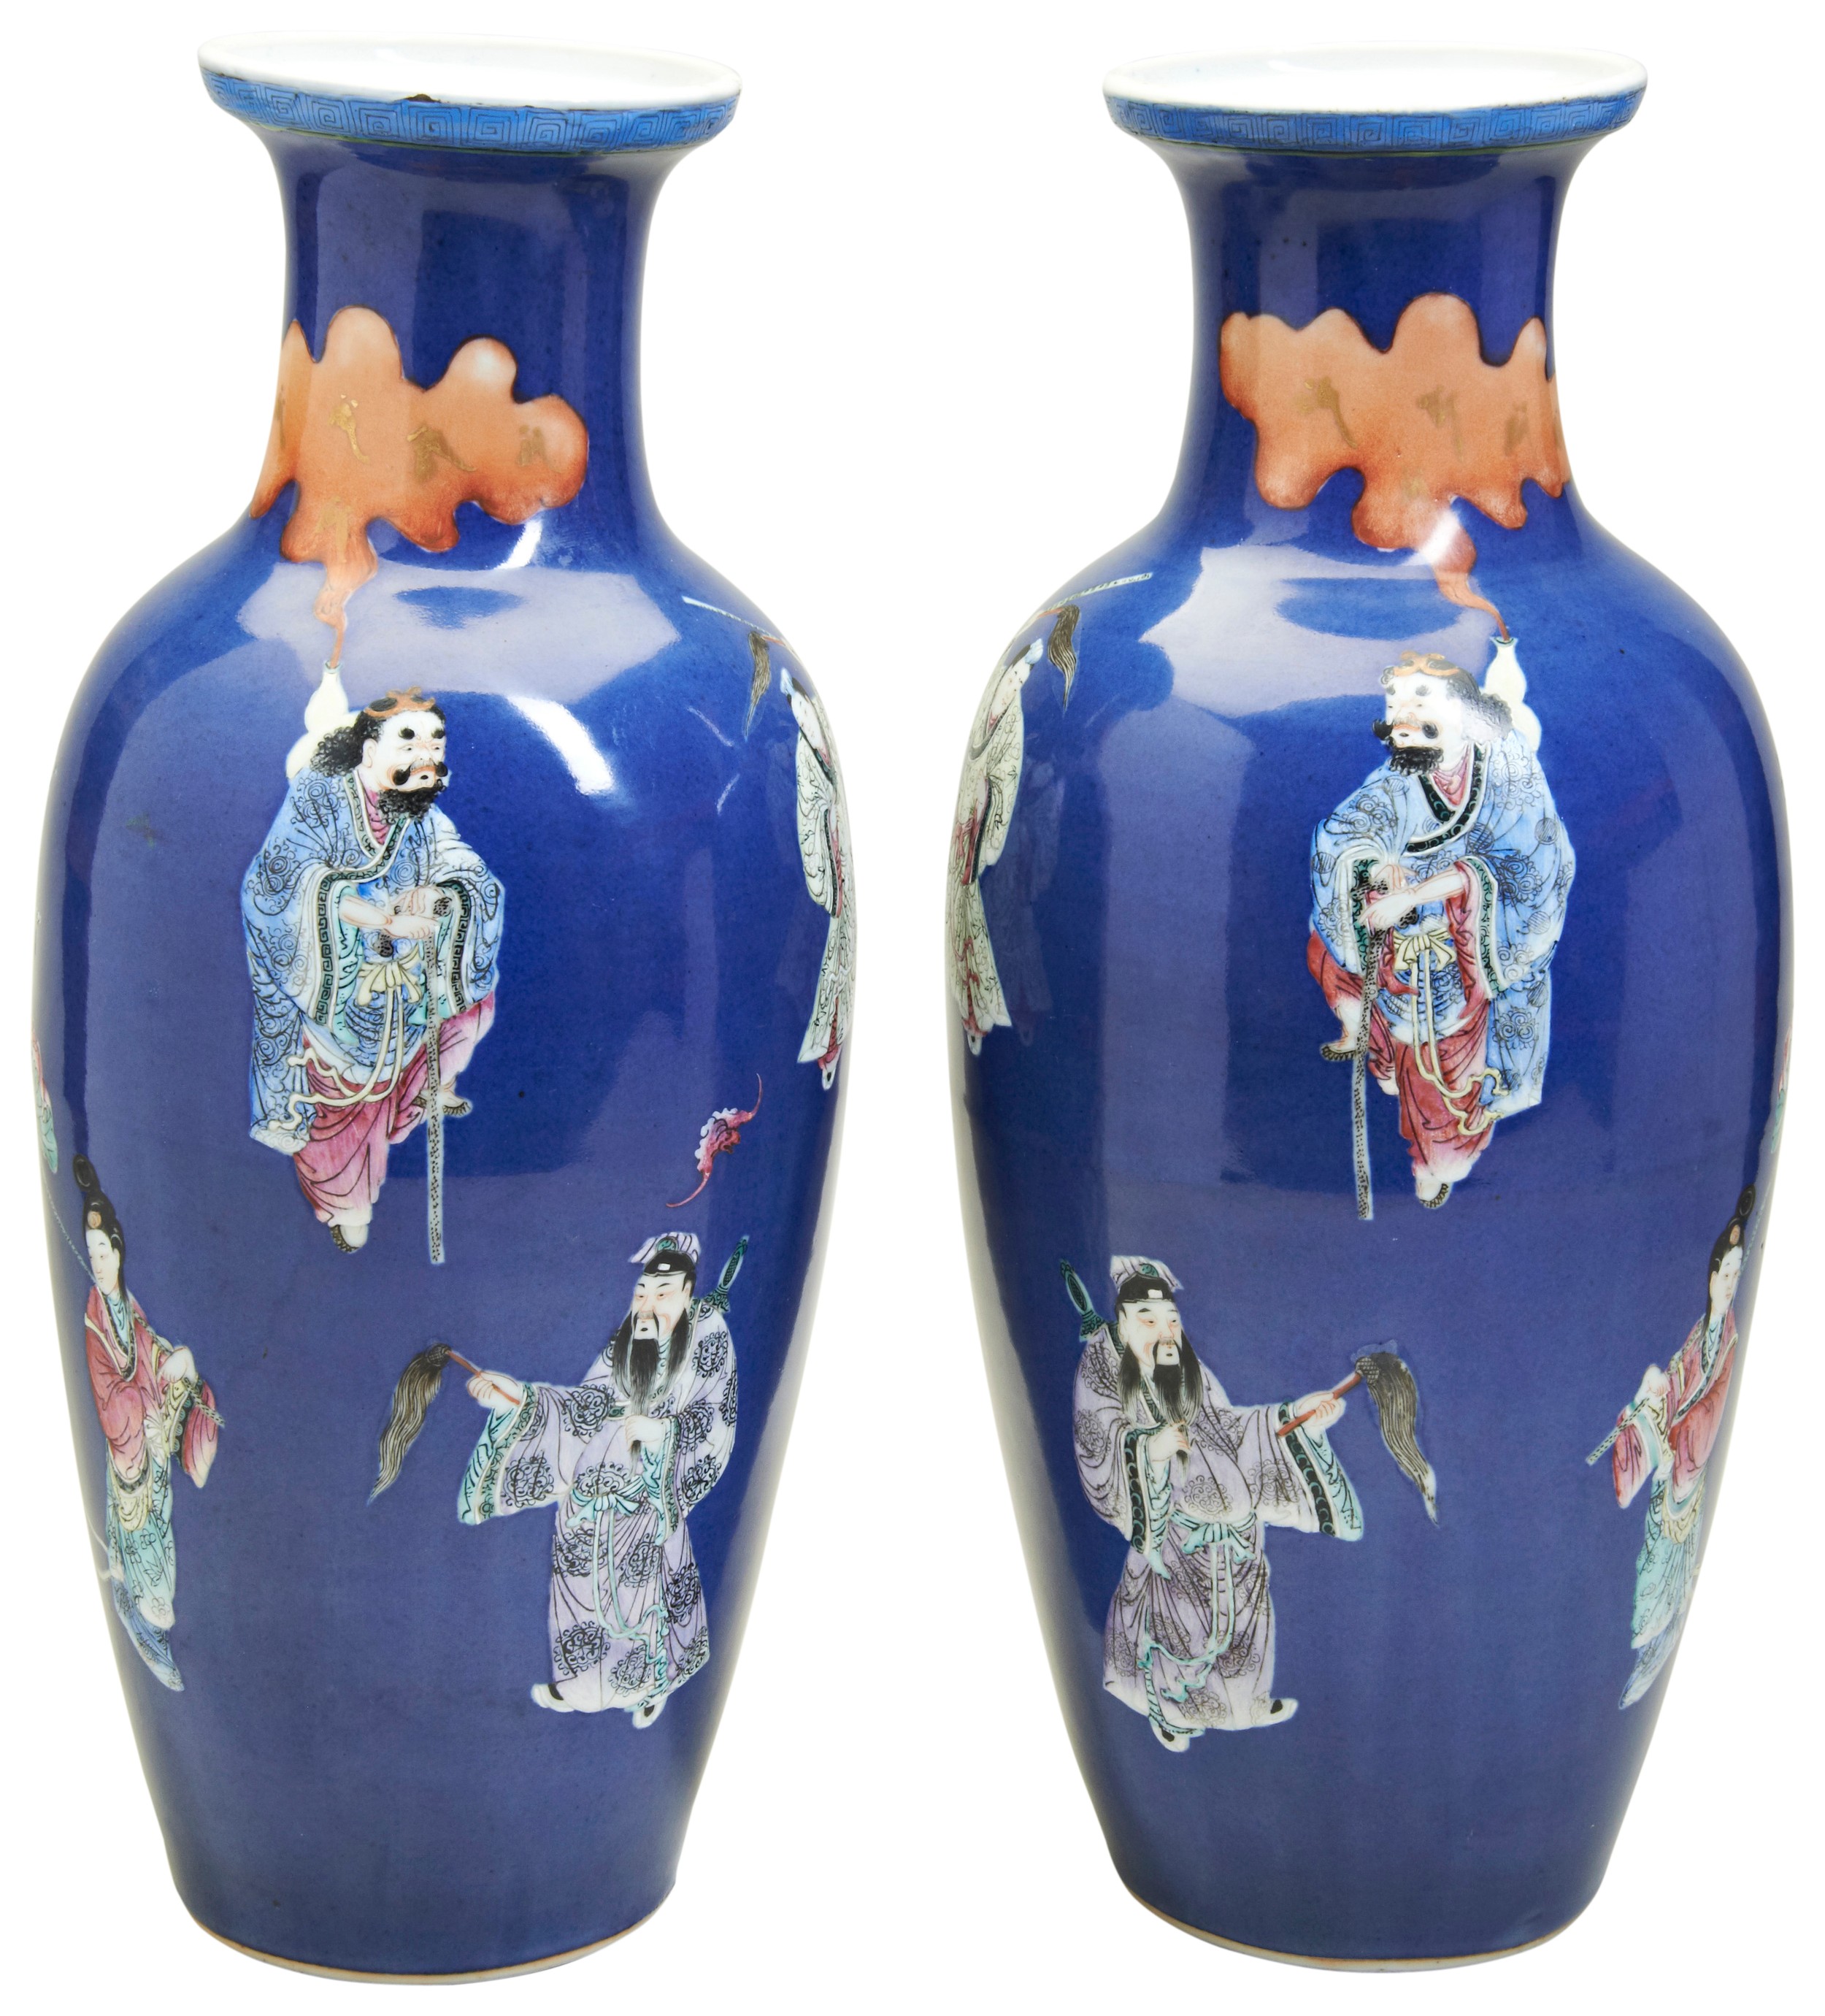 A GOOD PAIR OF POWDER-BLUE-GROUND FAMILLE ROSE 'IMMORTALS' VASES QING DYNASTY, 19TH CENTURY 清 十九世纪